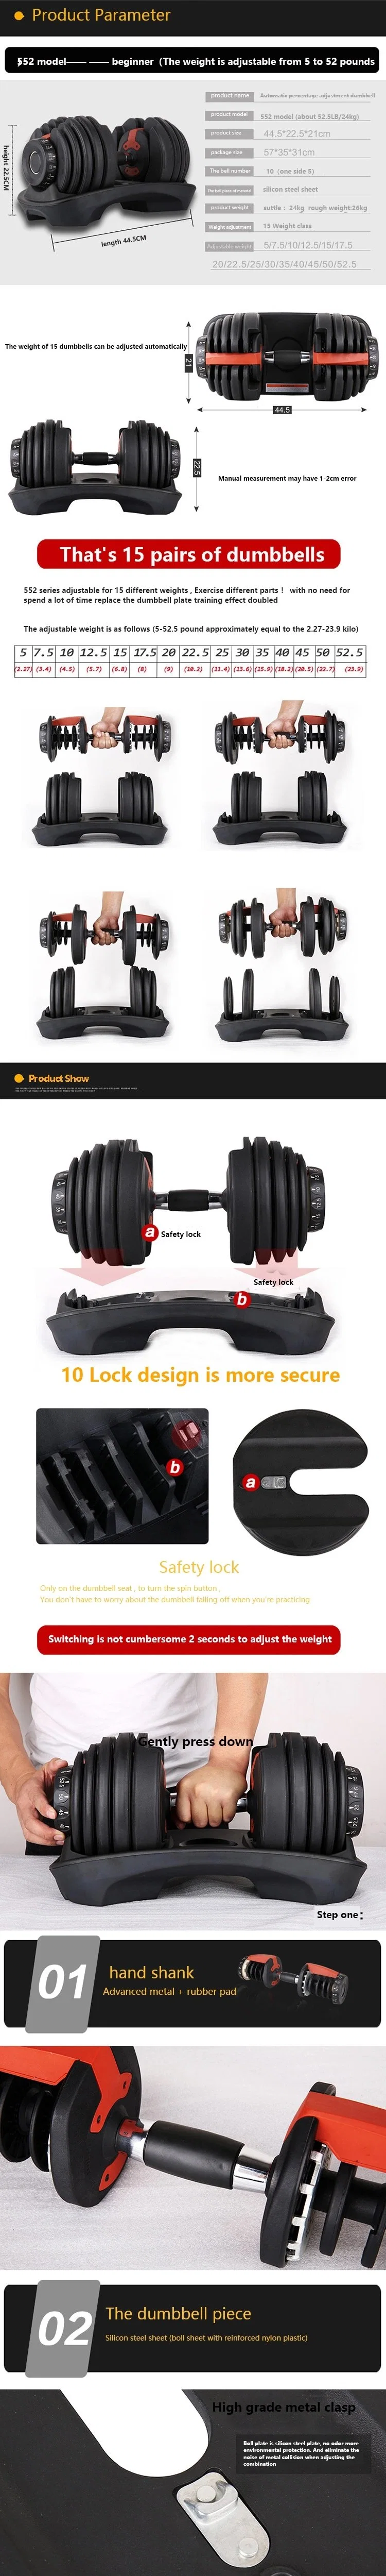 Wide Weight Range Gym Fitness Weight Lifting Exercise 24kg Adjustable Dumbbell for Sale